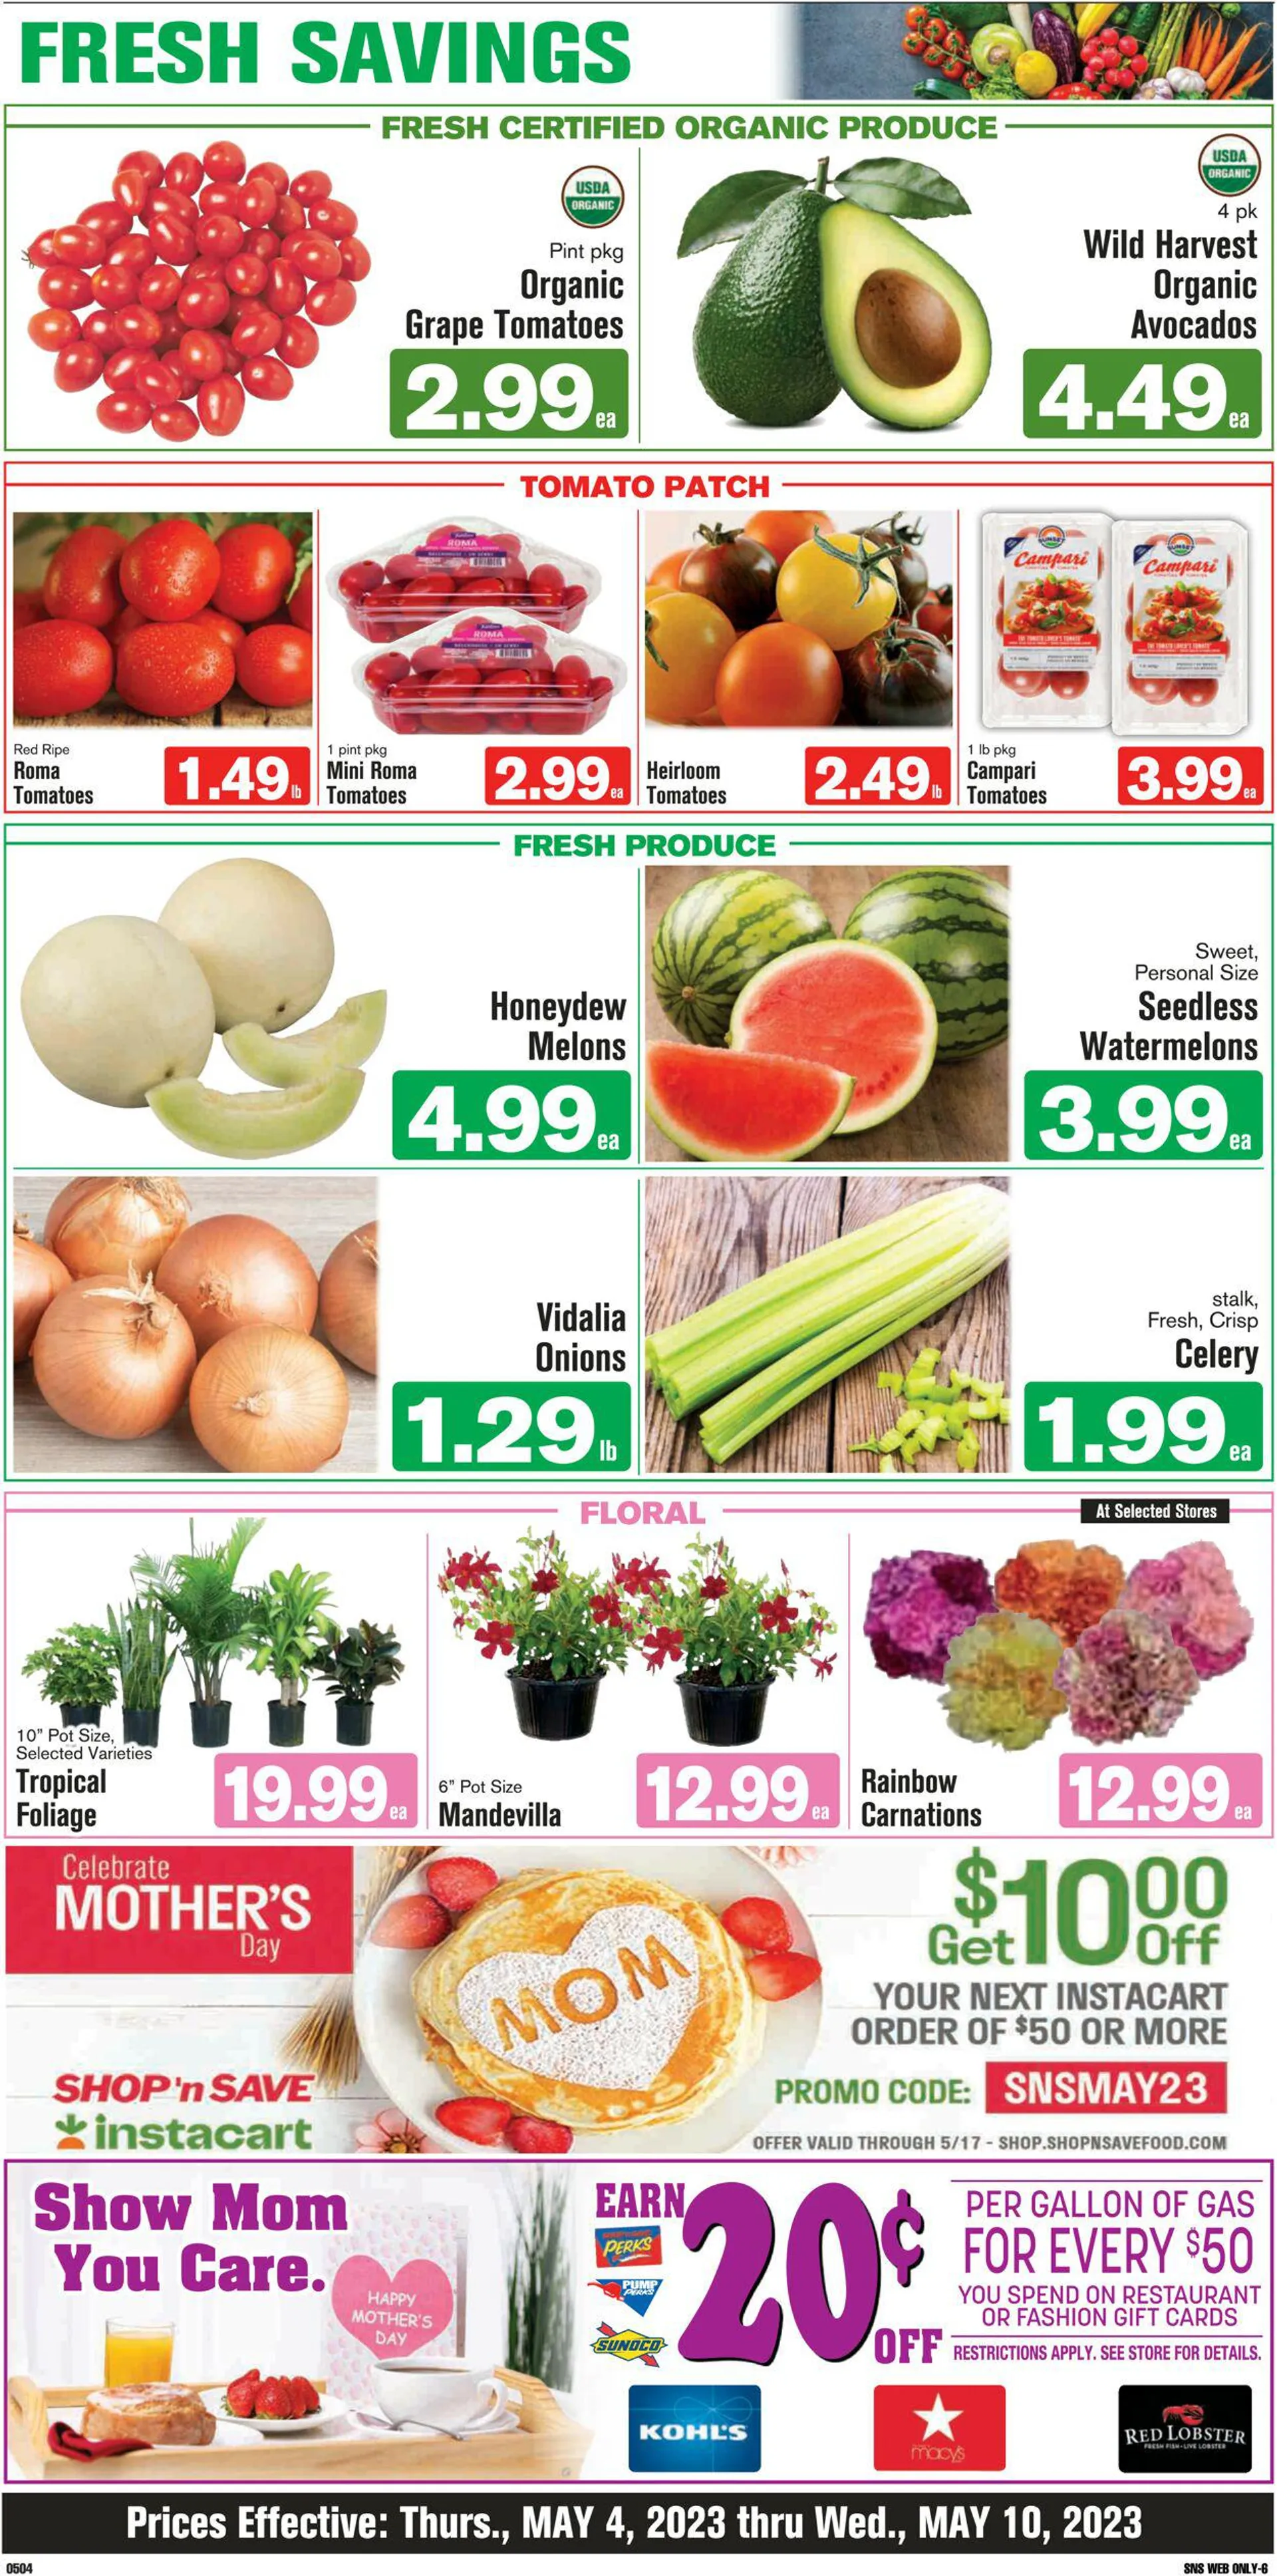 Shop ‘n Save Current weekly ad - 8